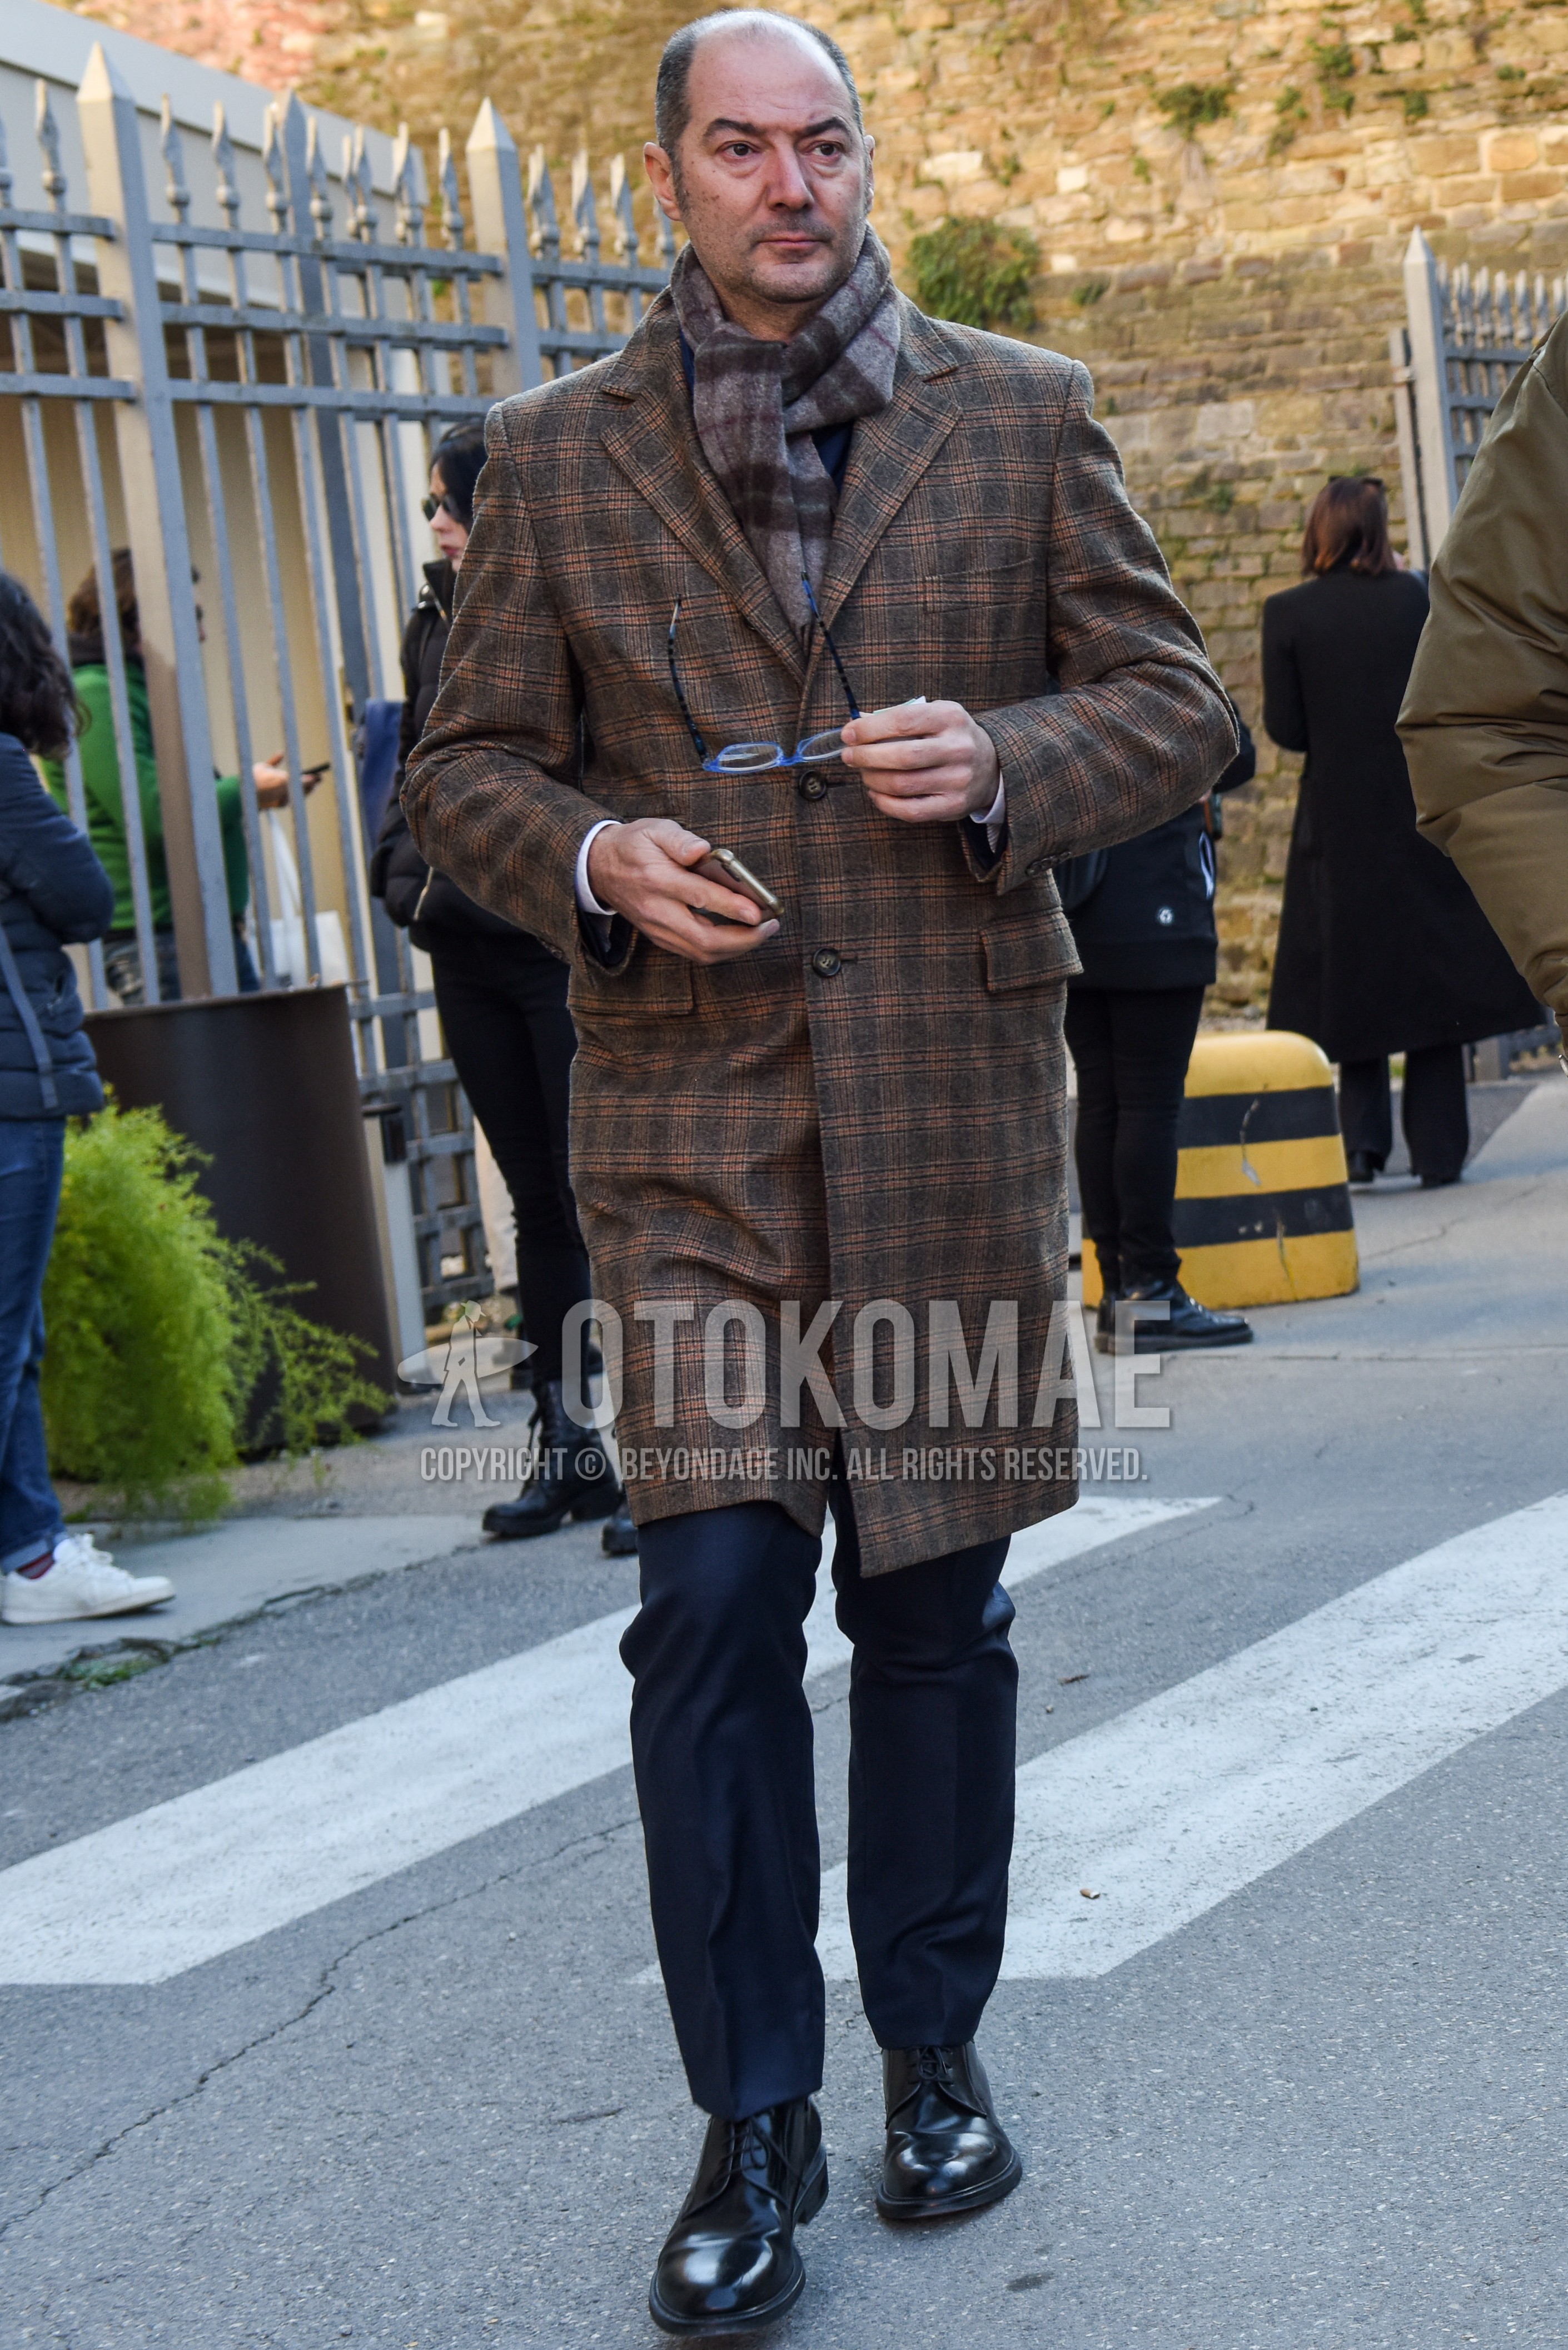 Men's autumn winter outfit with gray check scarf, gray check chester coat, gray plain slacks, black plain toe leather shoes.